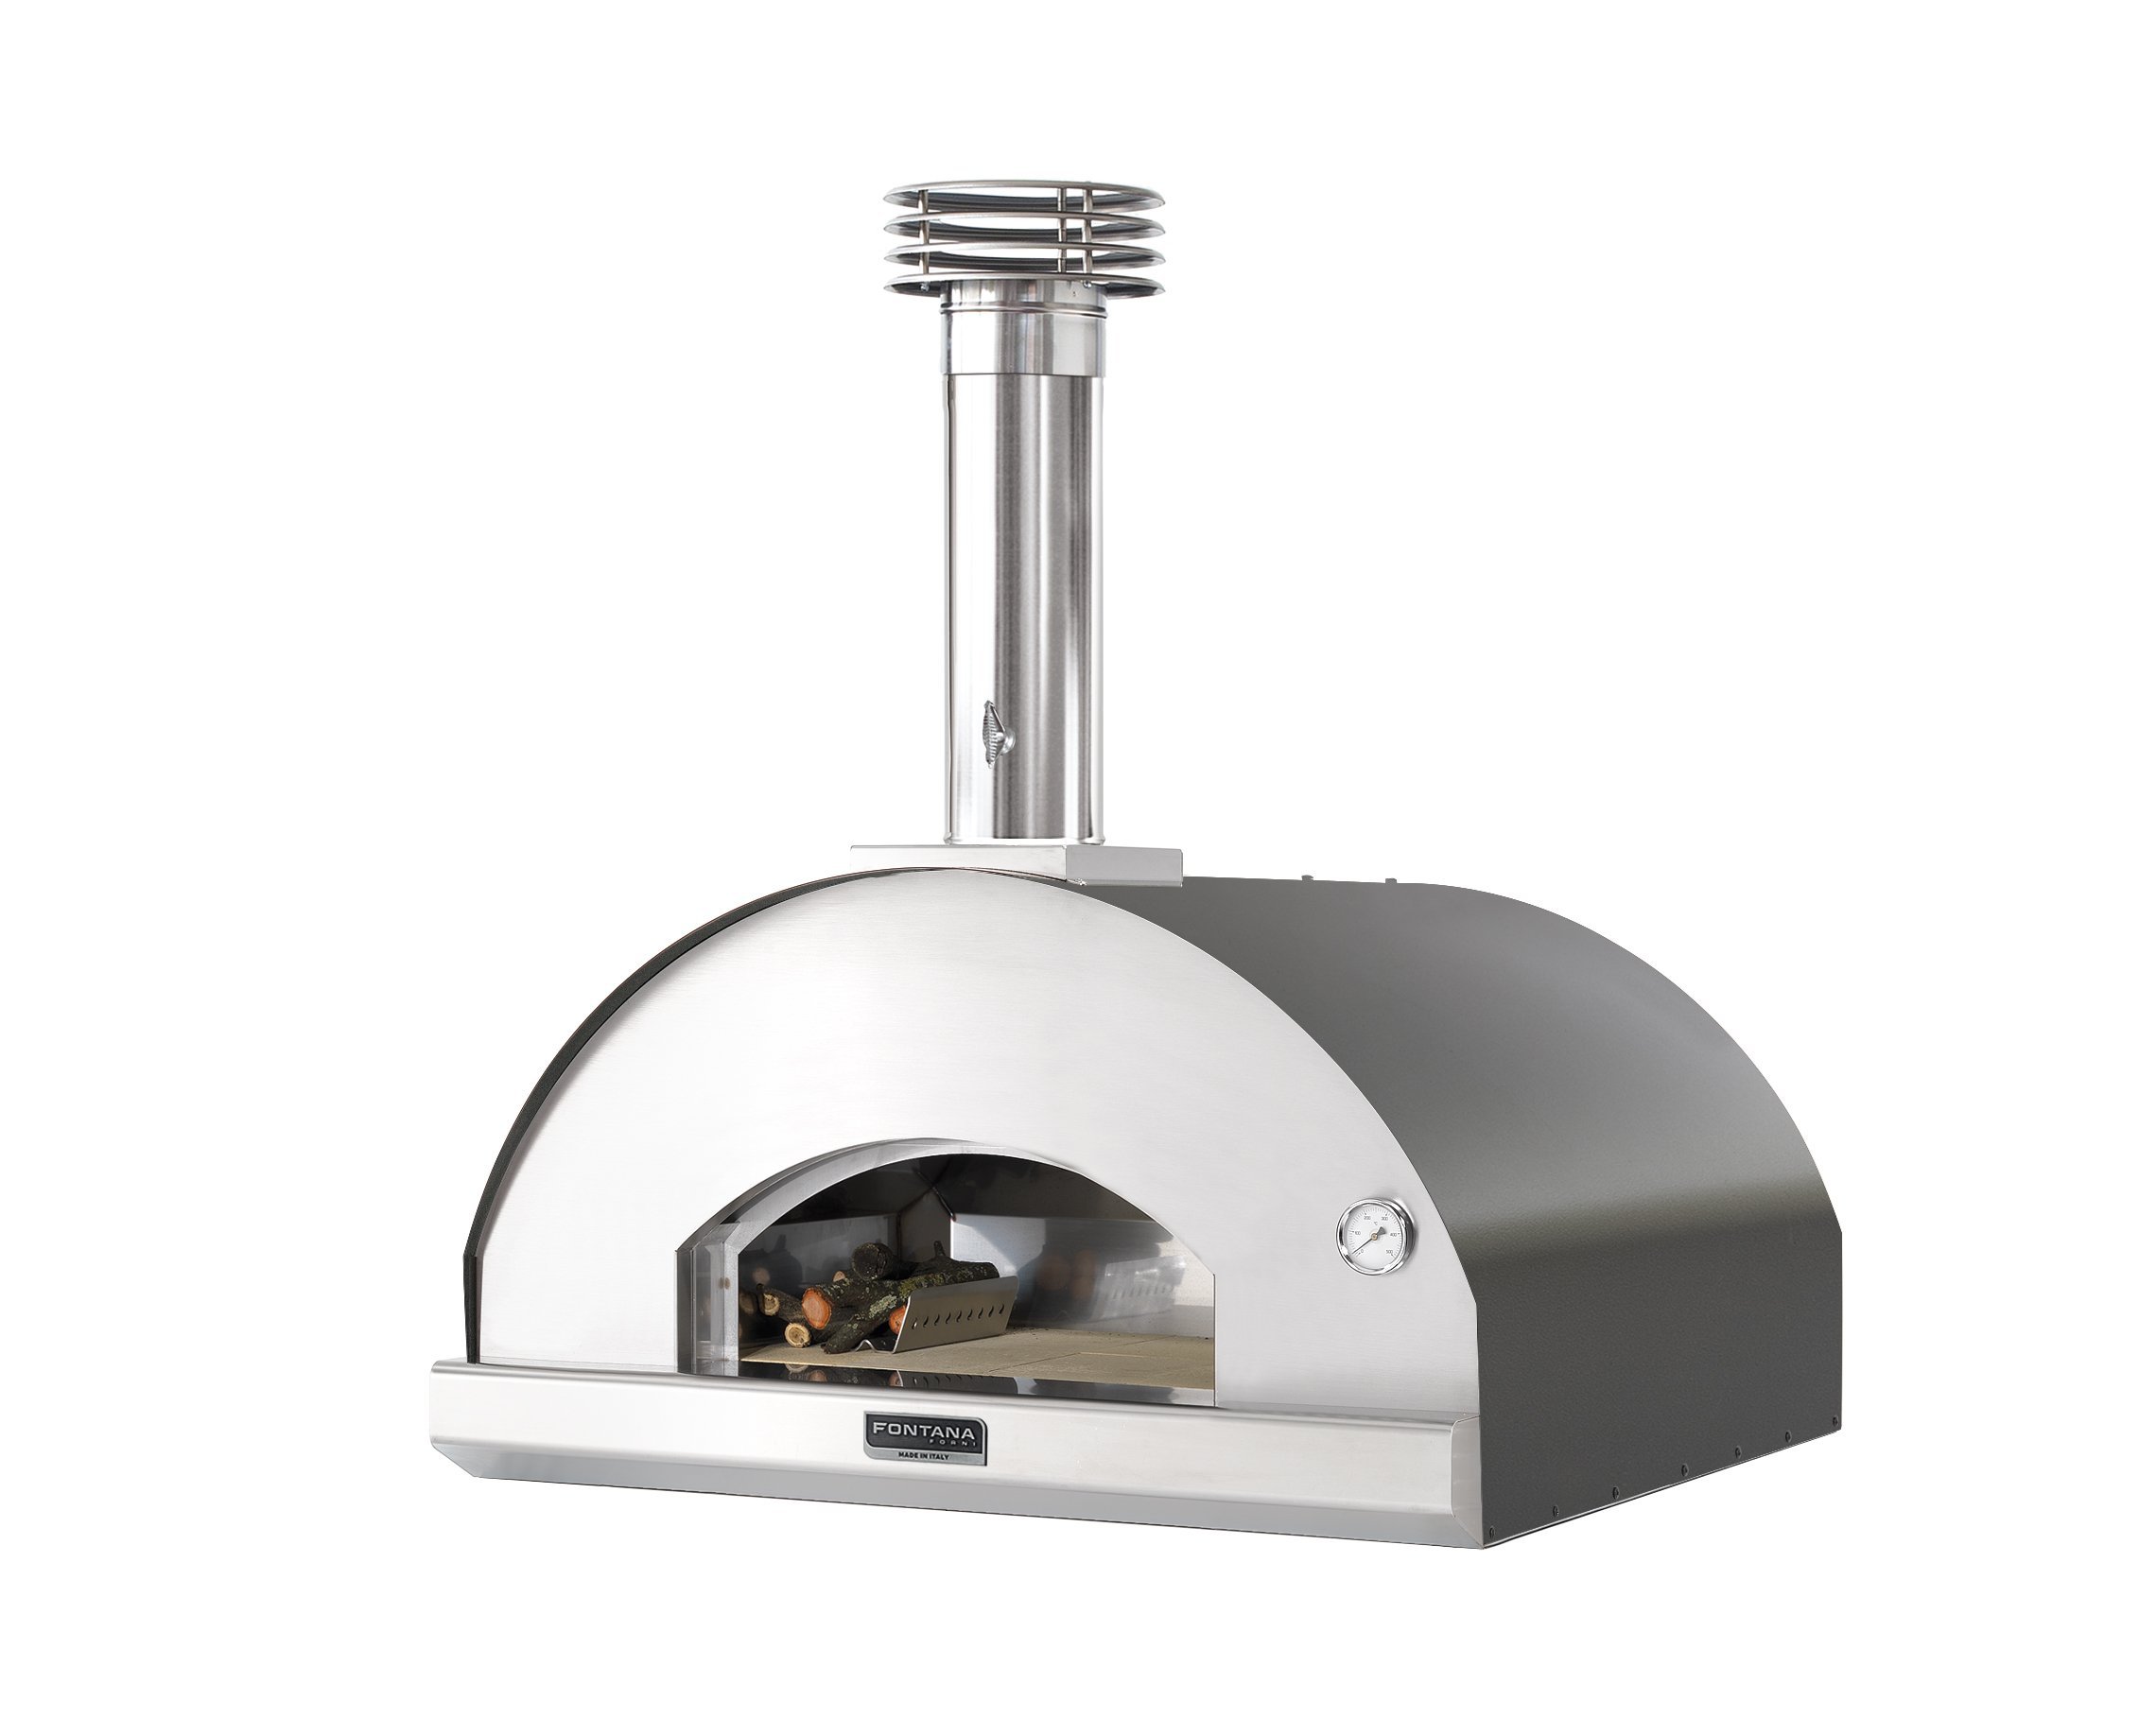 Dome oven Fontana Marinara, stainless steel pizza oven with wood firing, anthracite